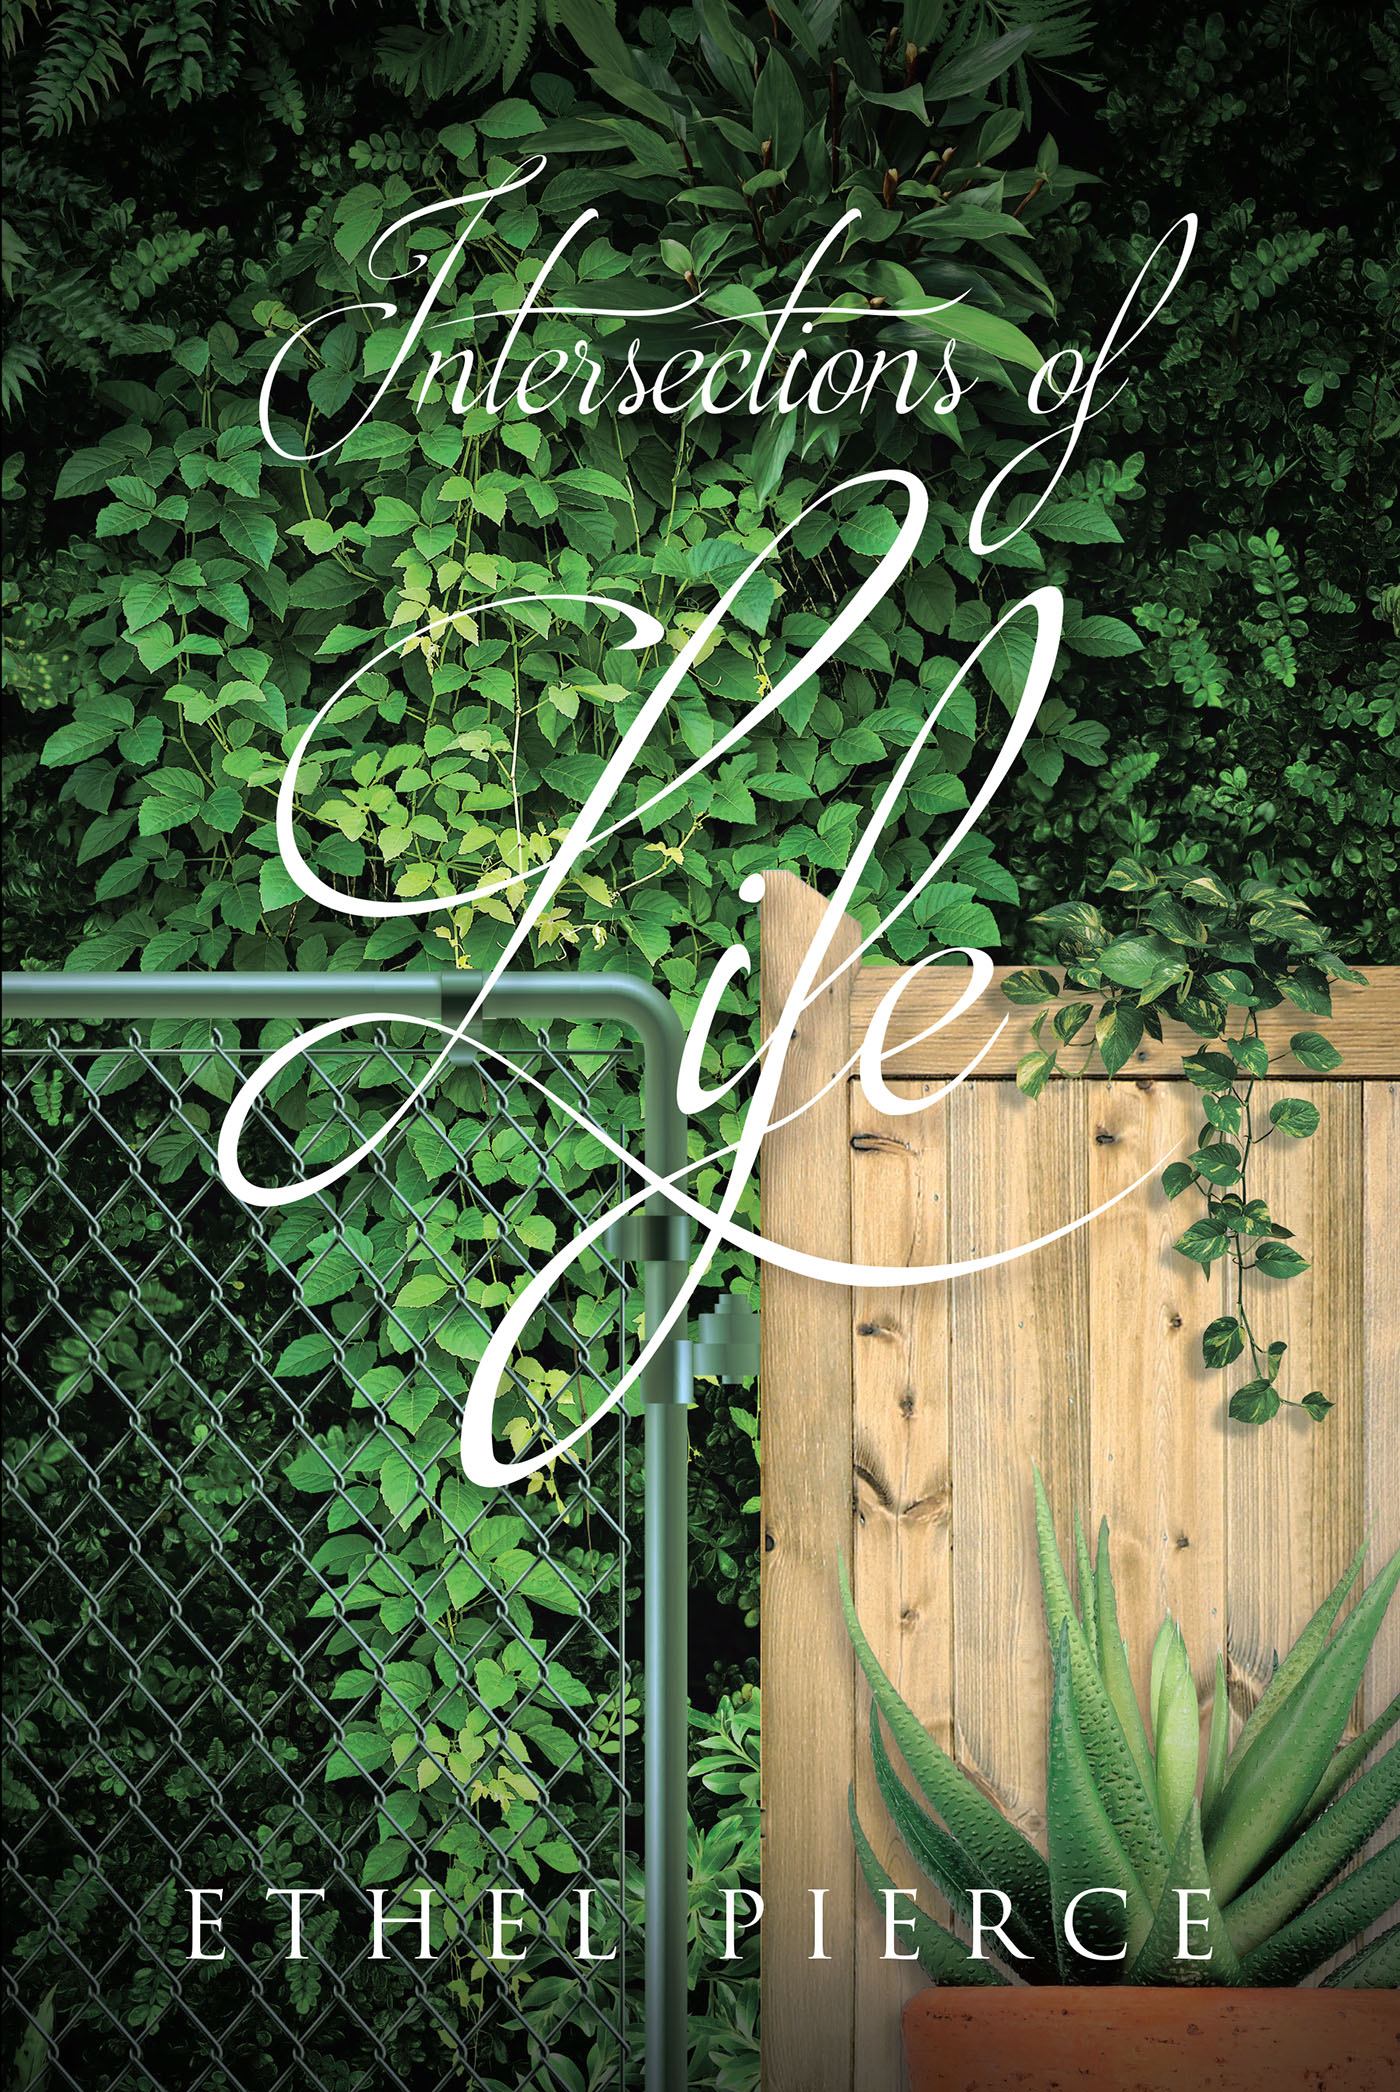 Author Ethel Pierce’s New Book, "Intersections of Life," is an Eye-Opening Poetic Journey for Readers to Focus on and Recenter Their Inner Selves in Today’s Society